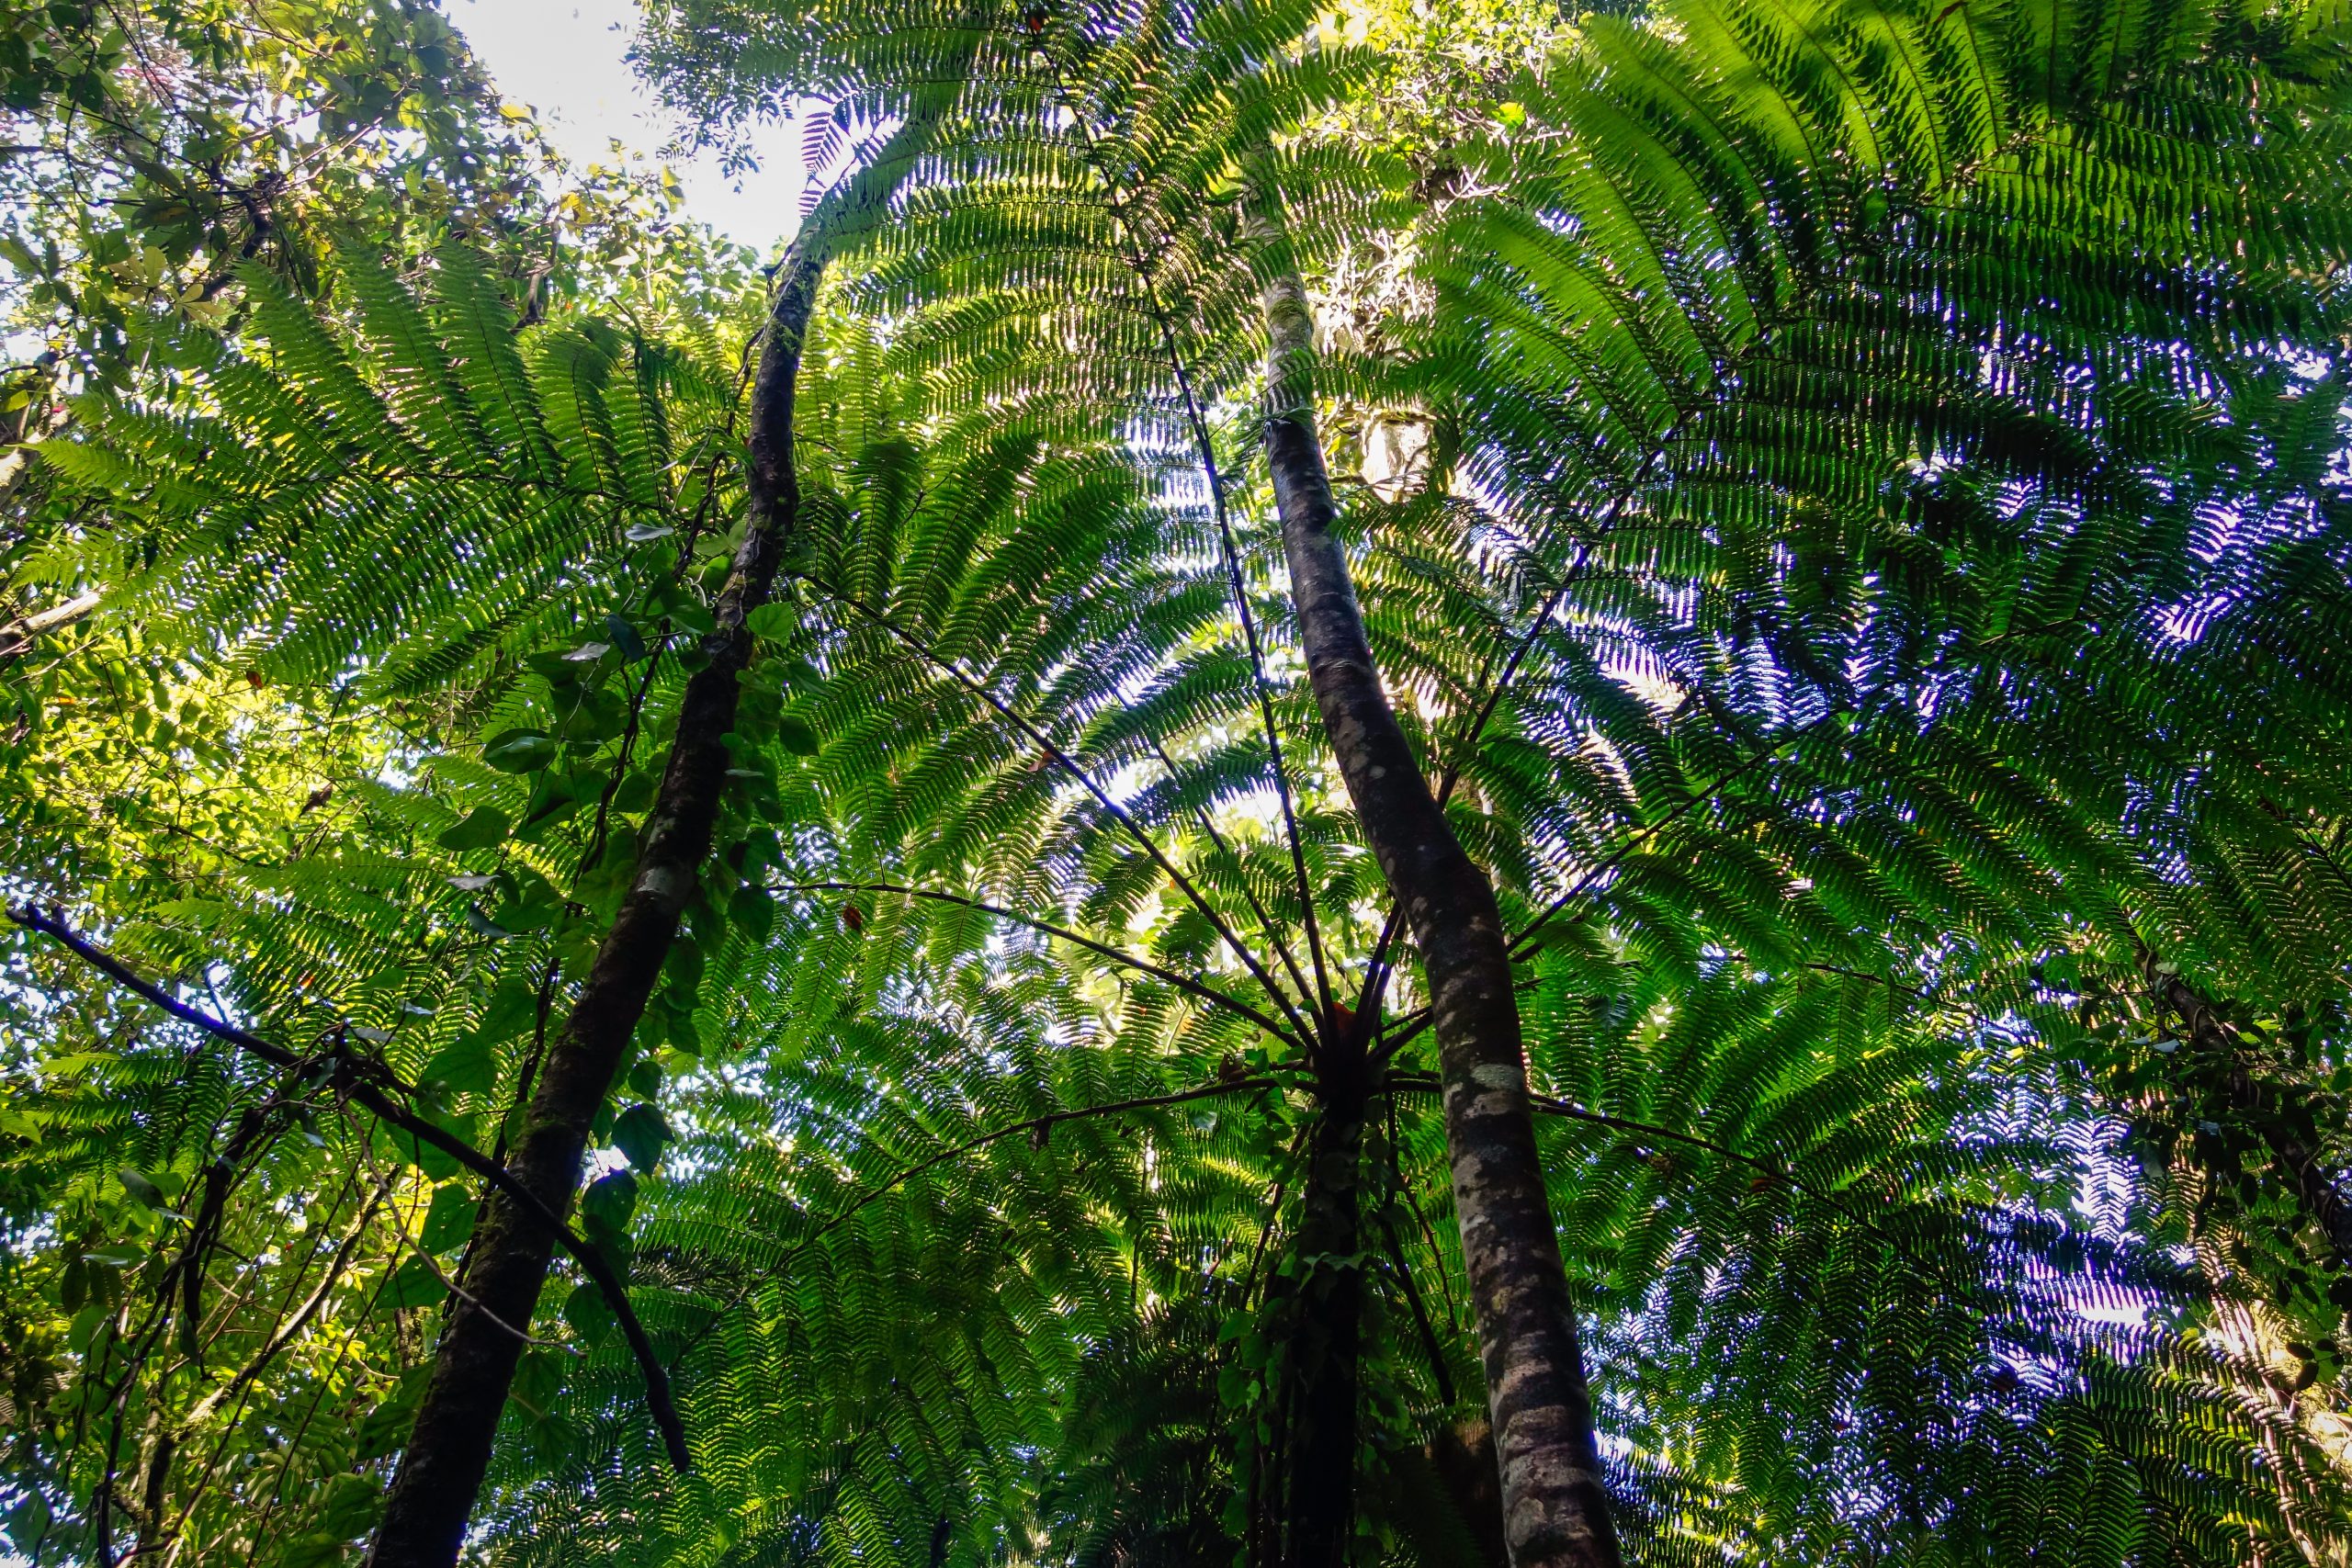 Large ferns in the Atlantic Forest, Brazil